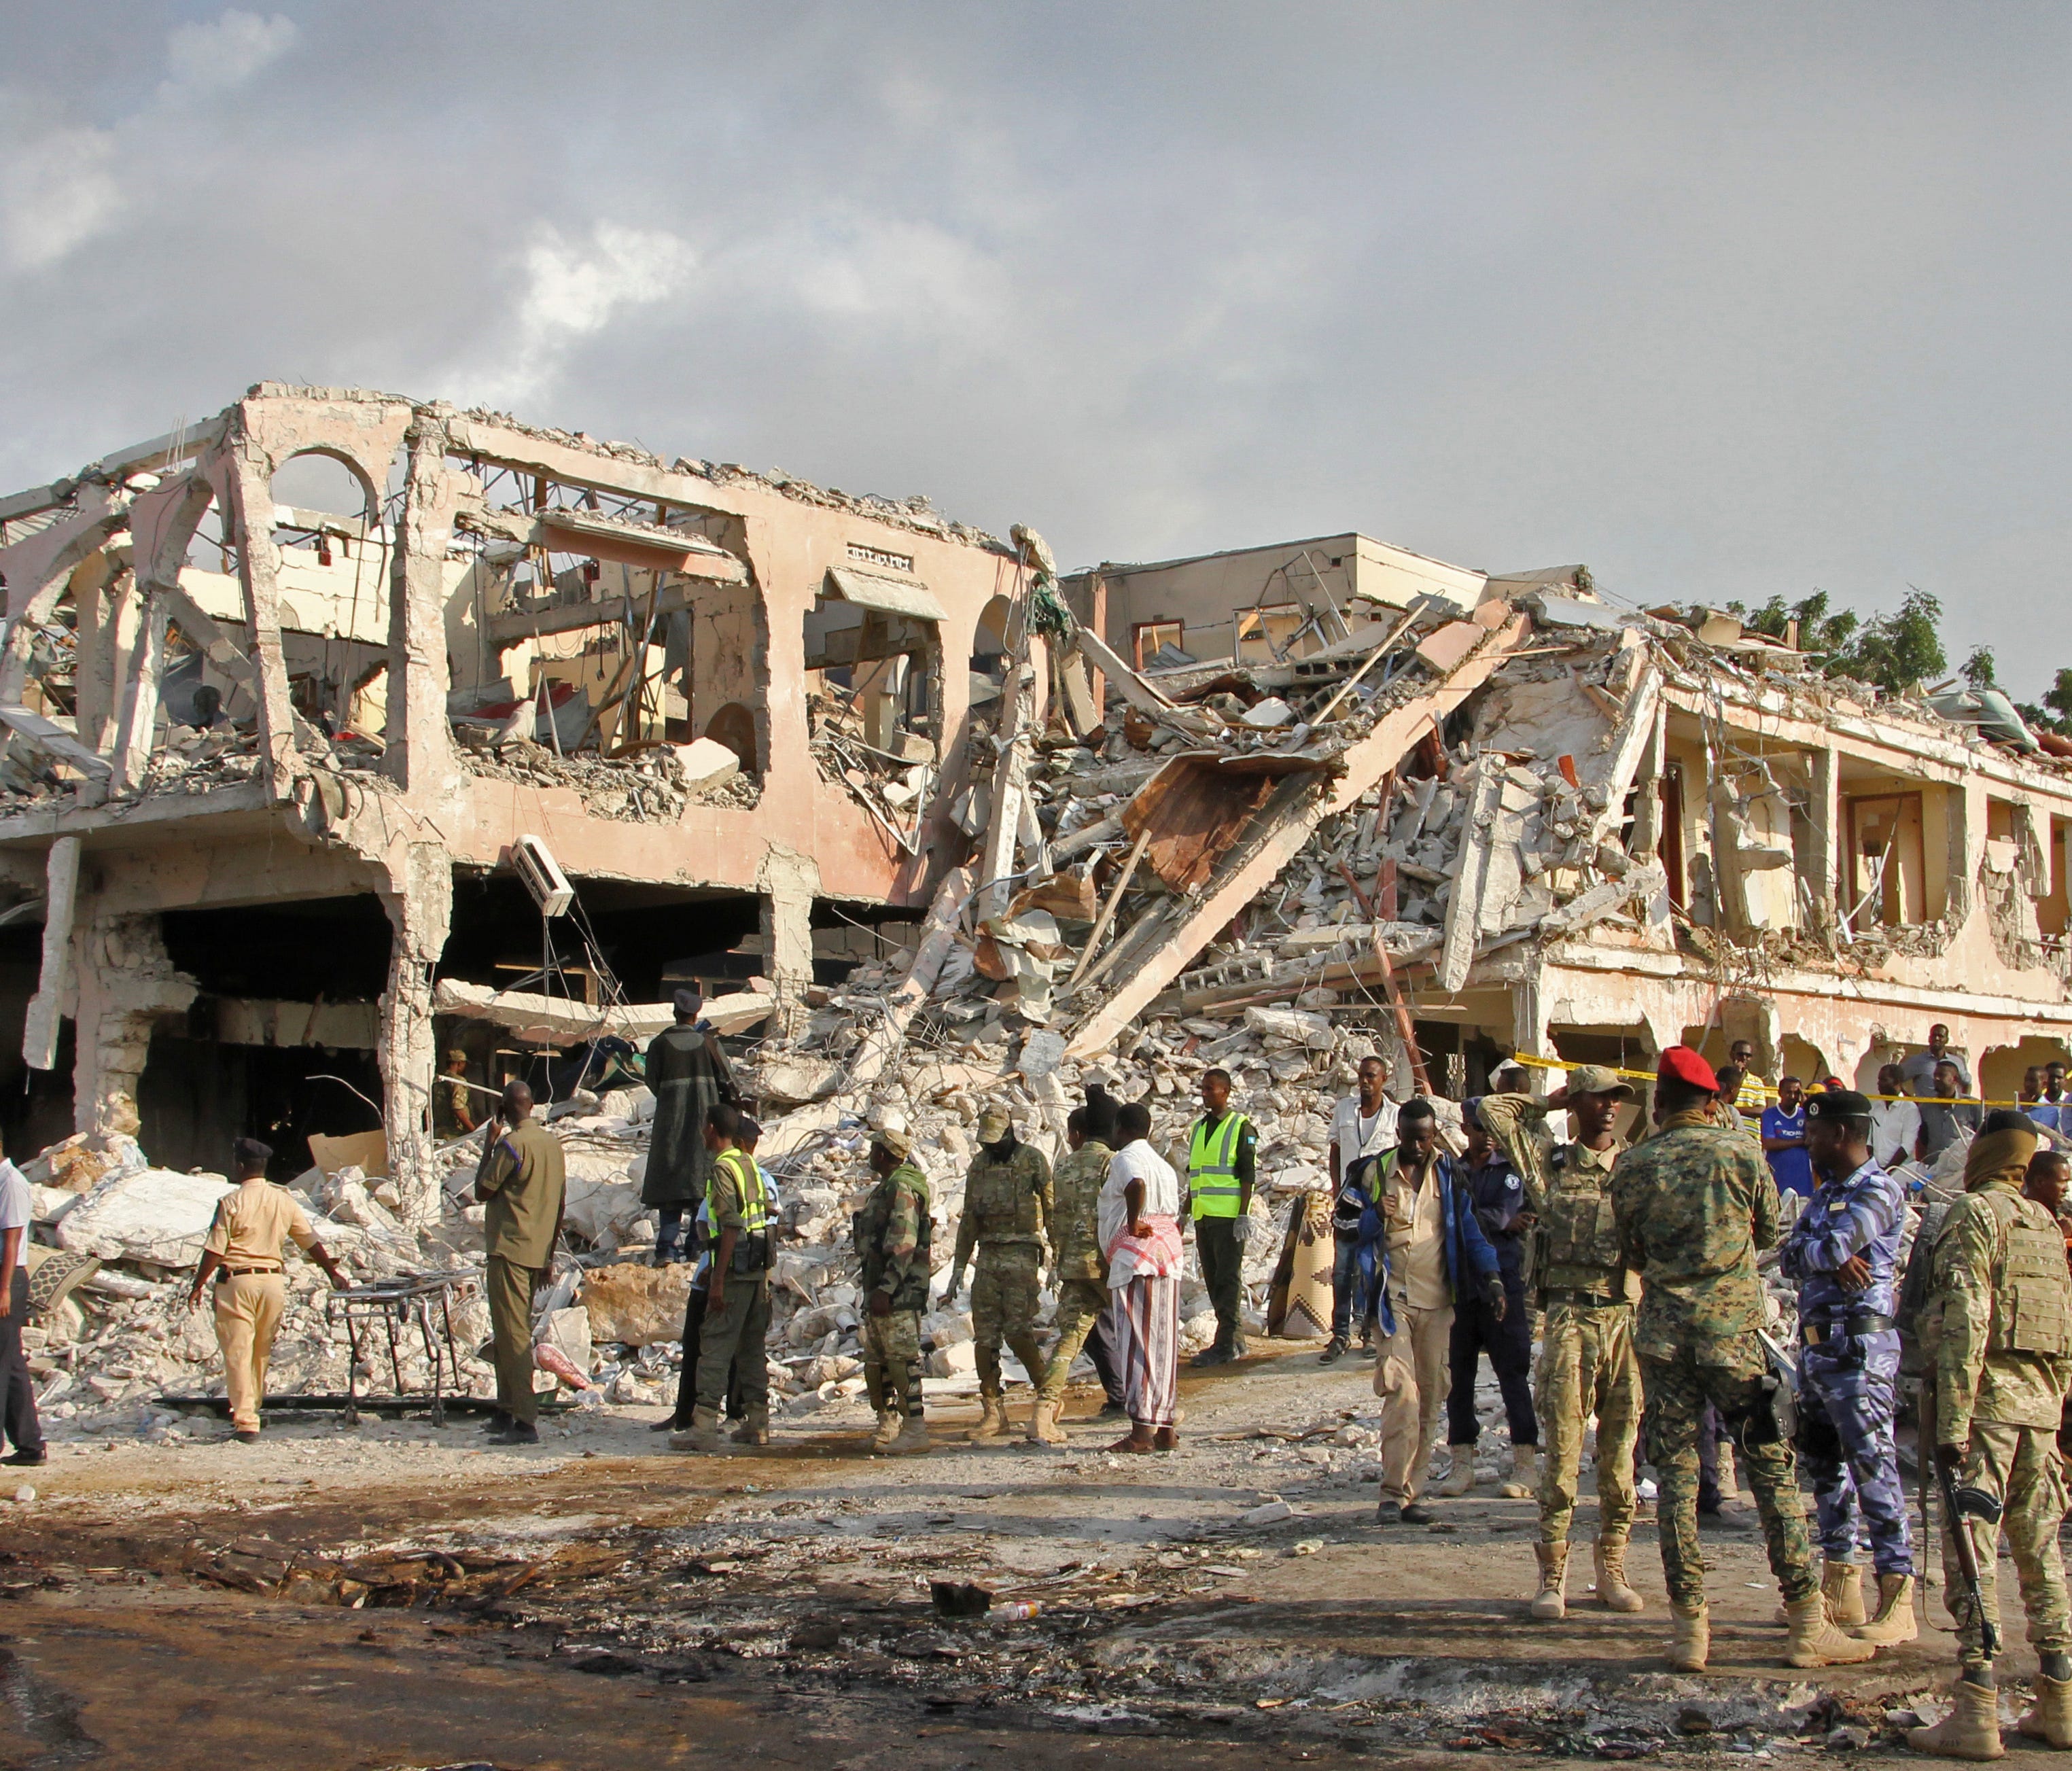 Somali security forces and others gather and search for bodies near destroyed buildings at the scene of Saturday's blast, in Mogadishu, Somalia, on Oct. 15, 2017.